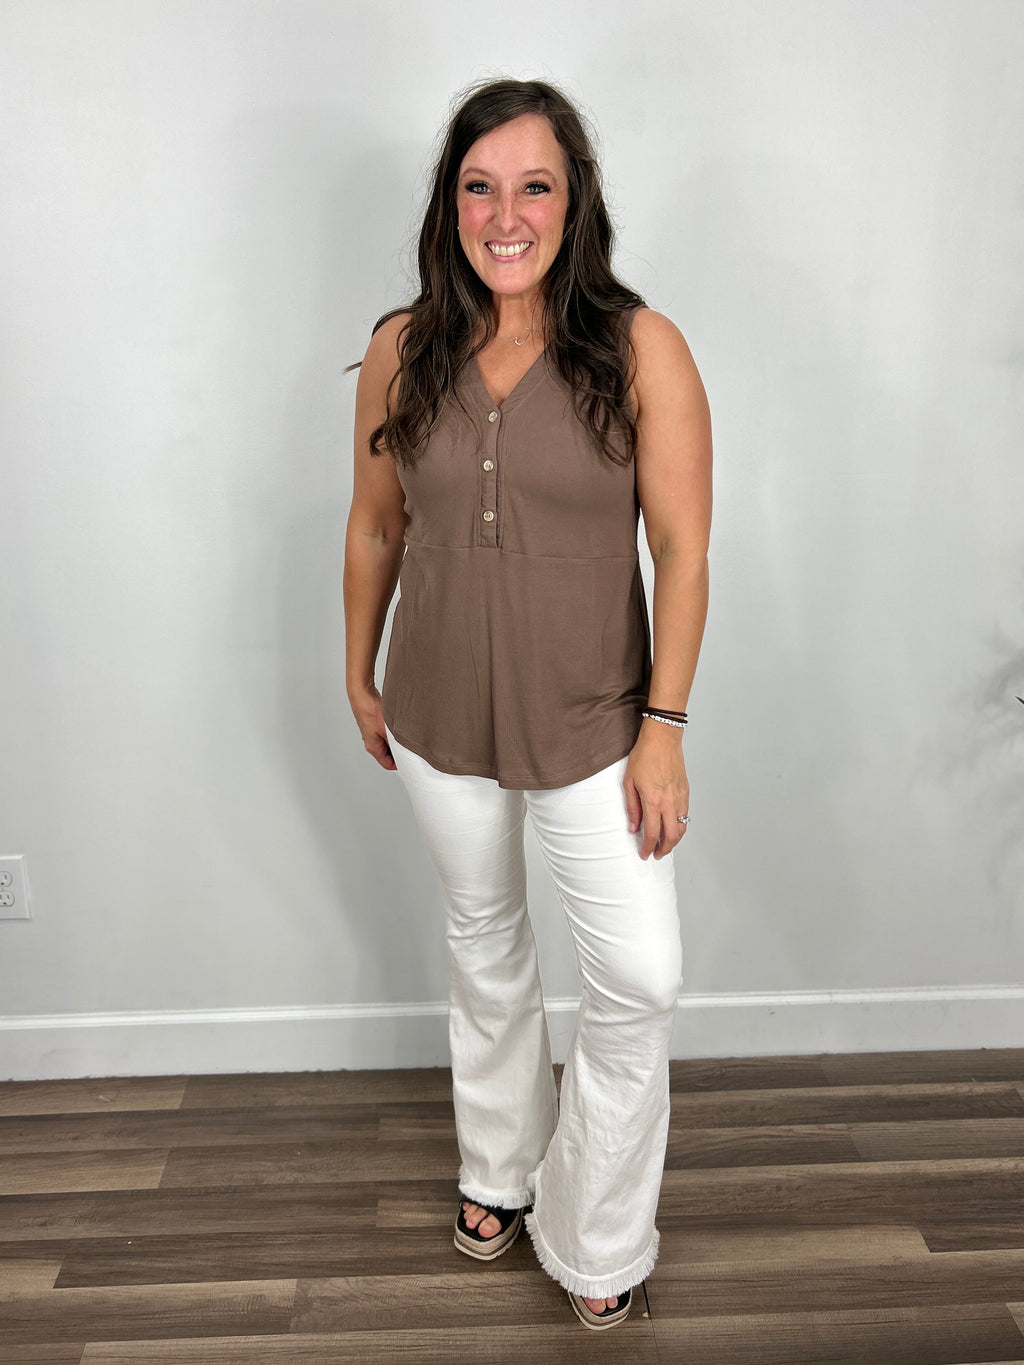 Women's brown sleeveless henley top paired with white flare pant and black wedge sandals.